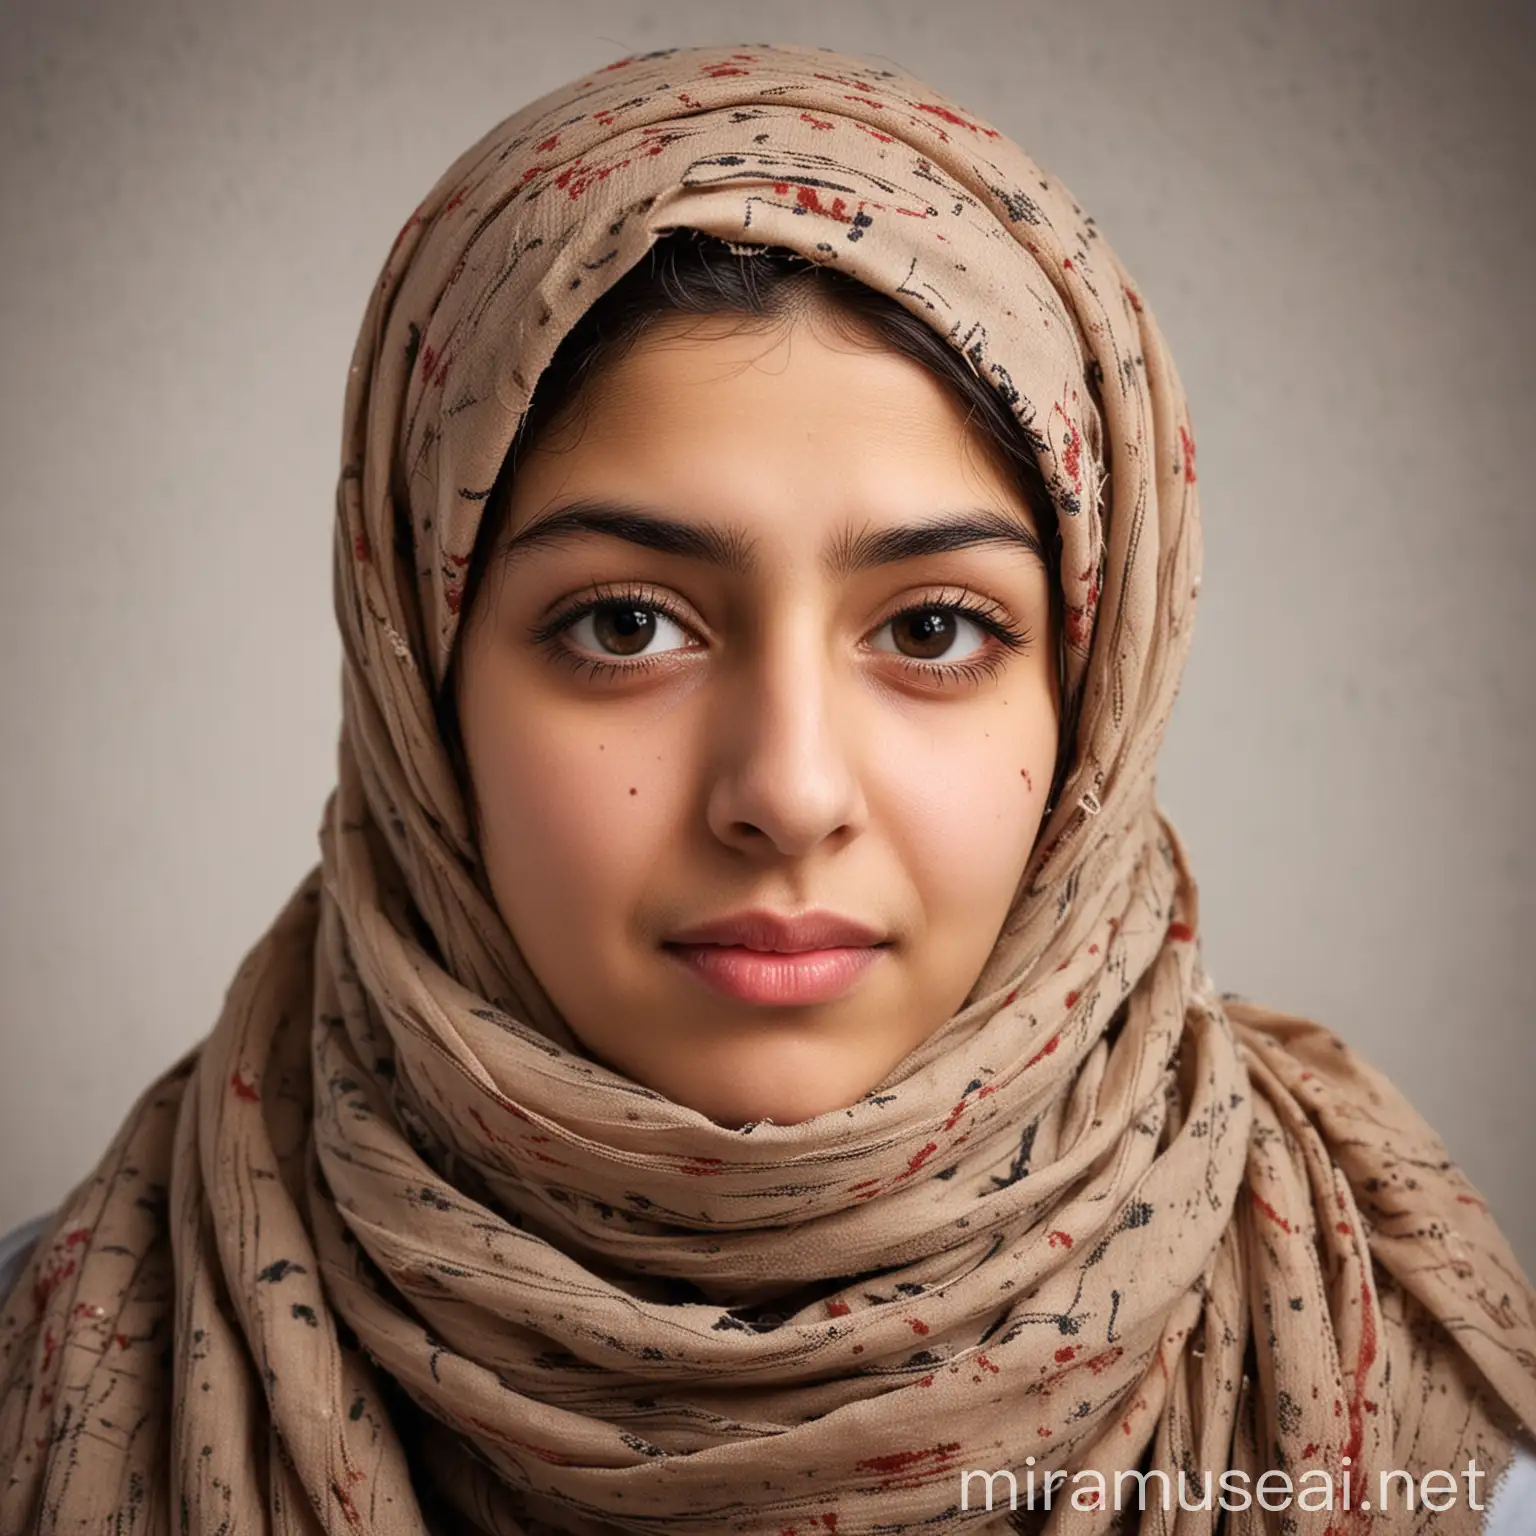 Young Bahraini Woman with Scarf Expressing Deep Concern